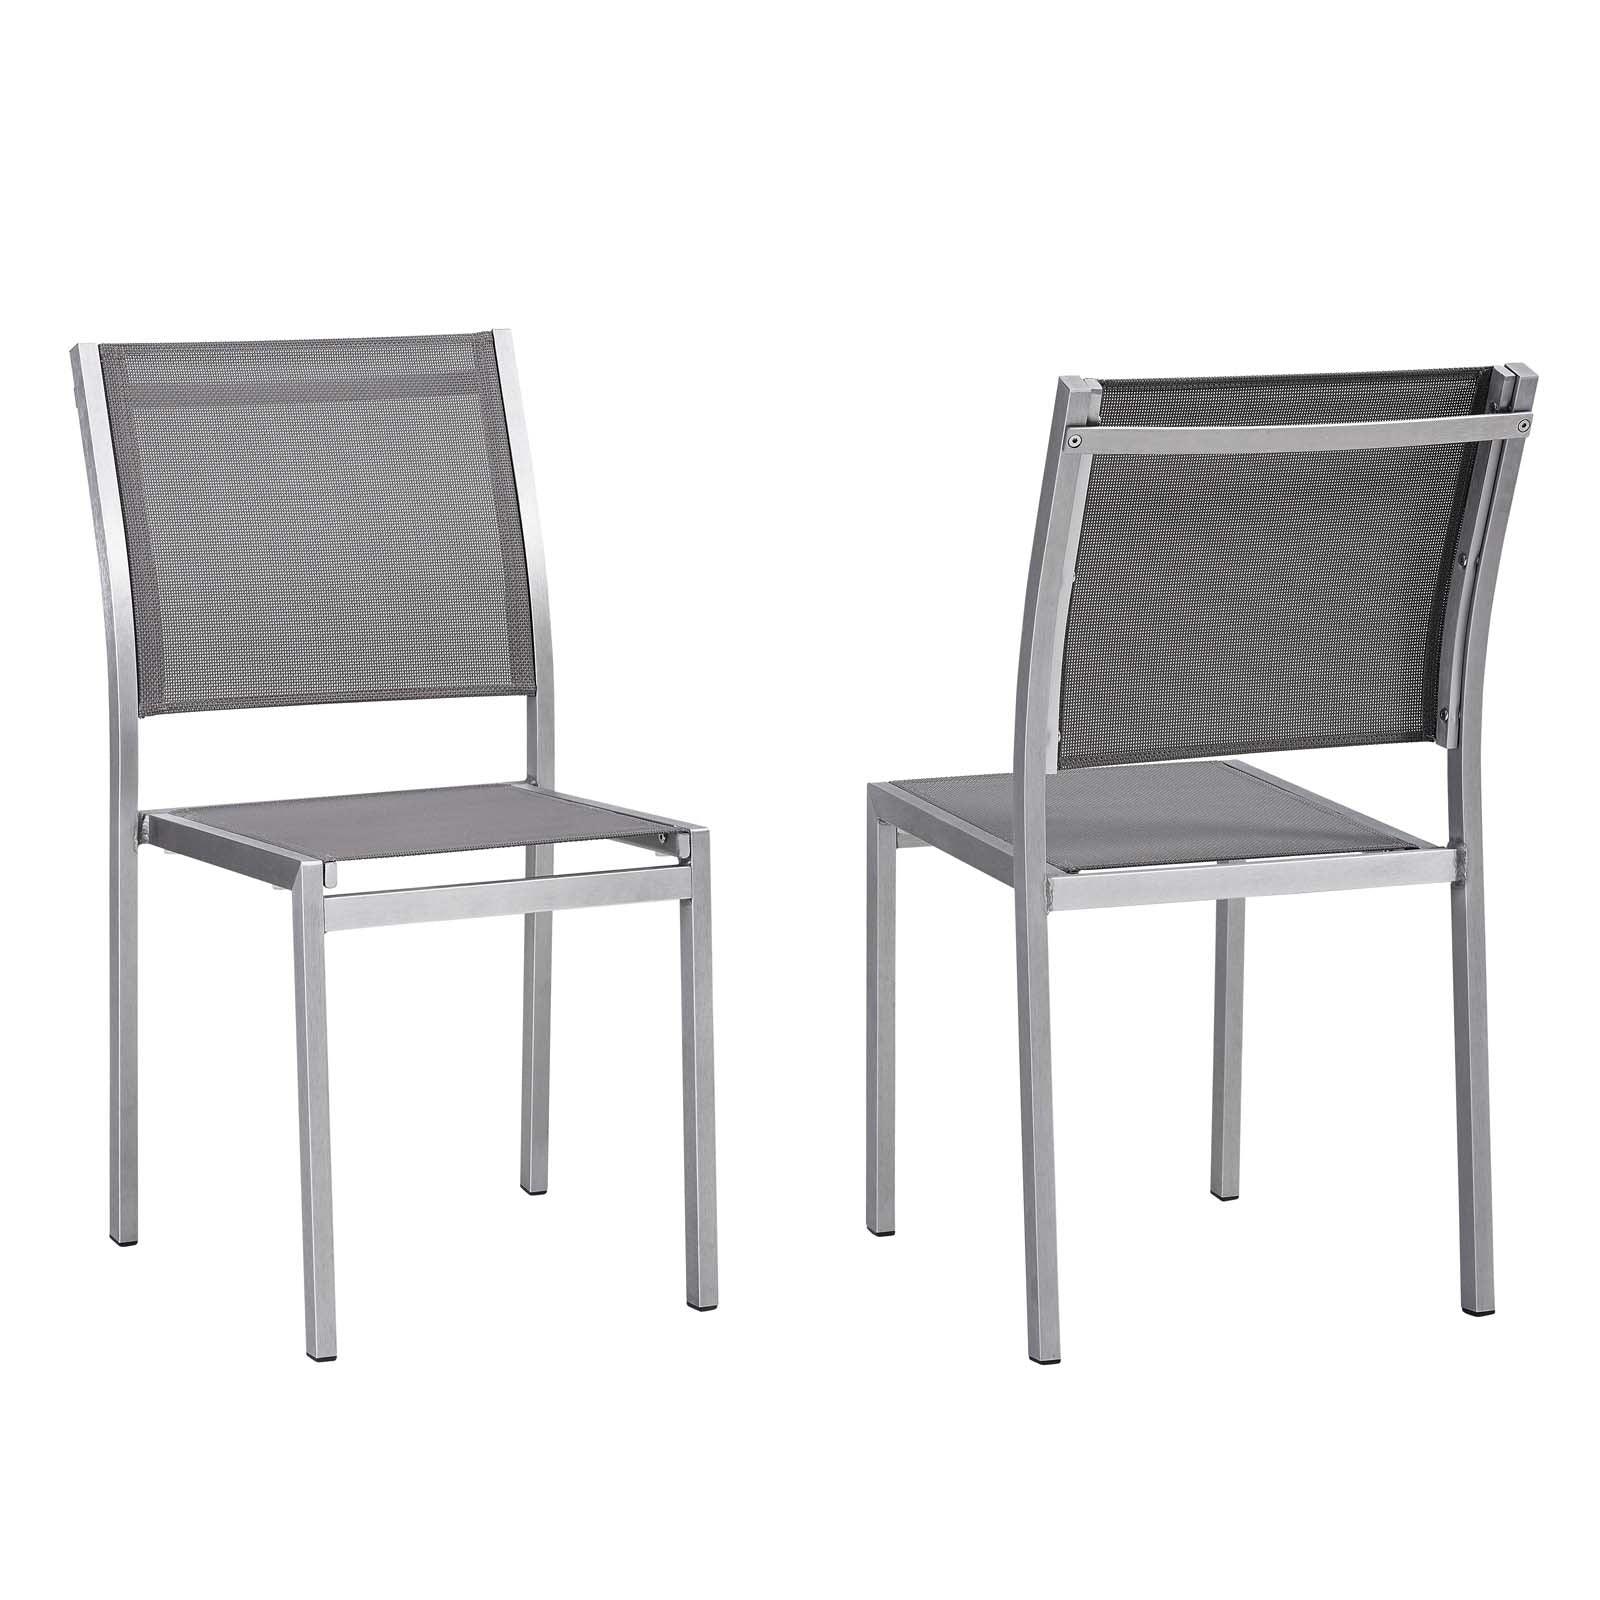 Modway Shore Side Chair Outdoor Patio Aluminum Set of 2 FredCo